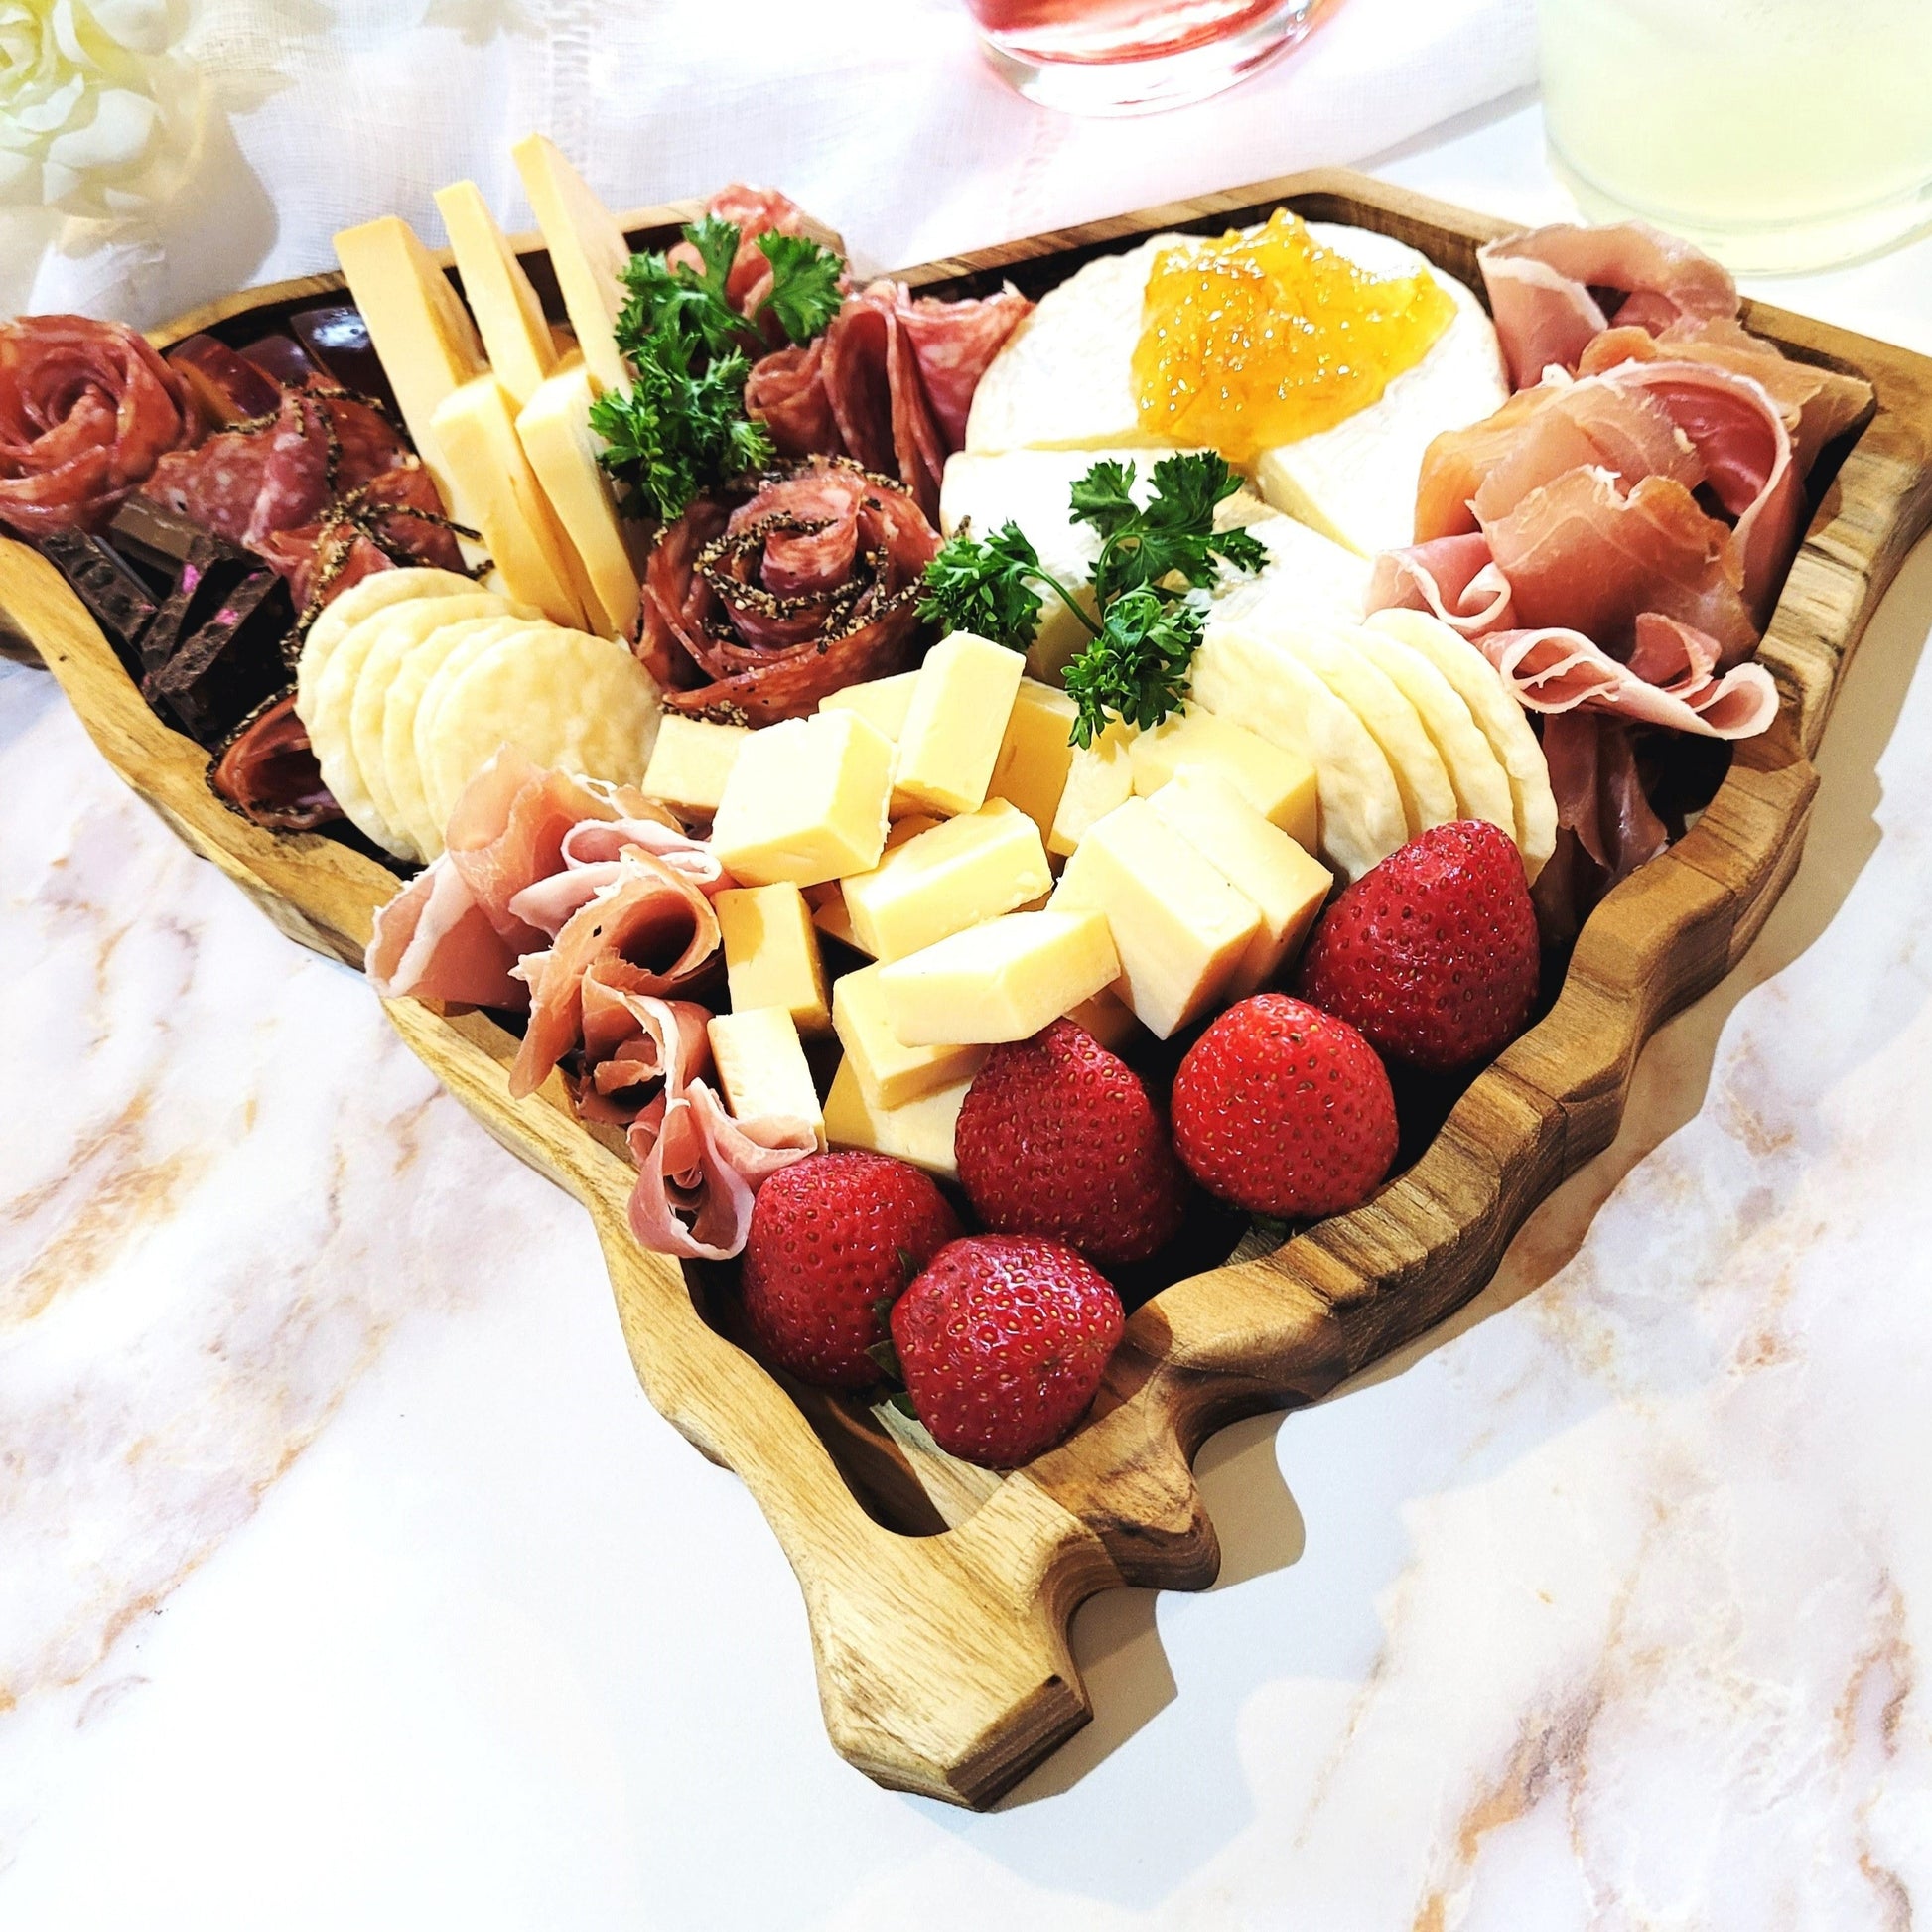 State-shaped wooden charcuterie board showcasing South Carolina with delicious assortment of meats, cheeses, and crackers